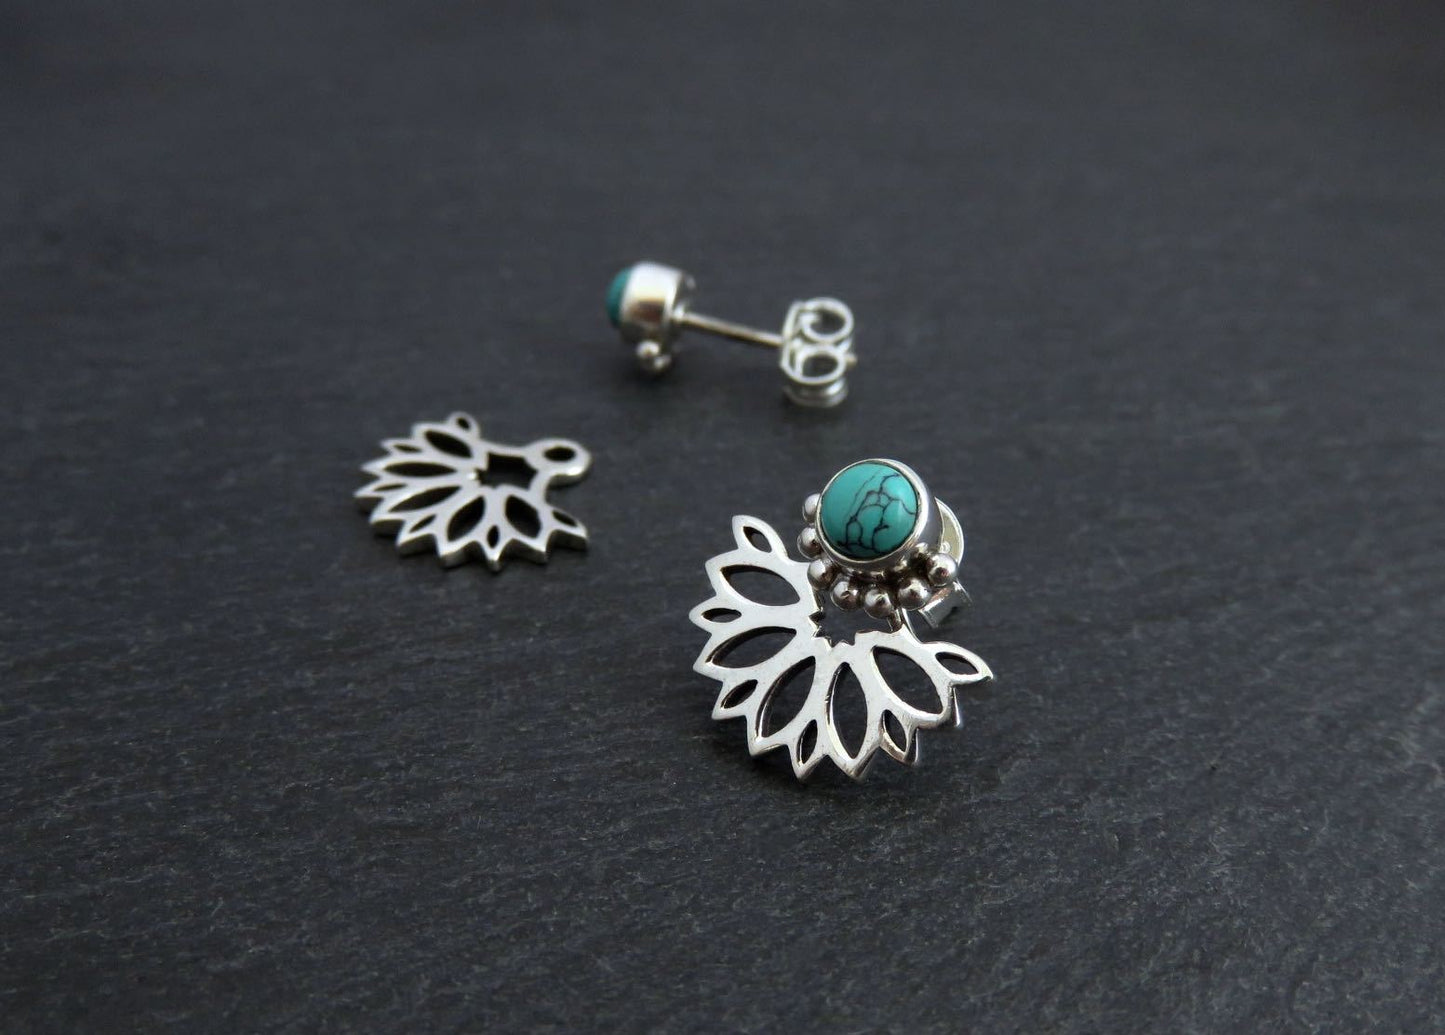 Front back stud earrings made of silver with turquoise stone 